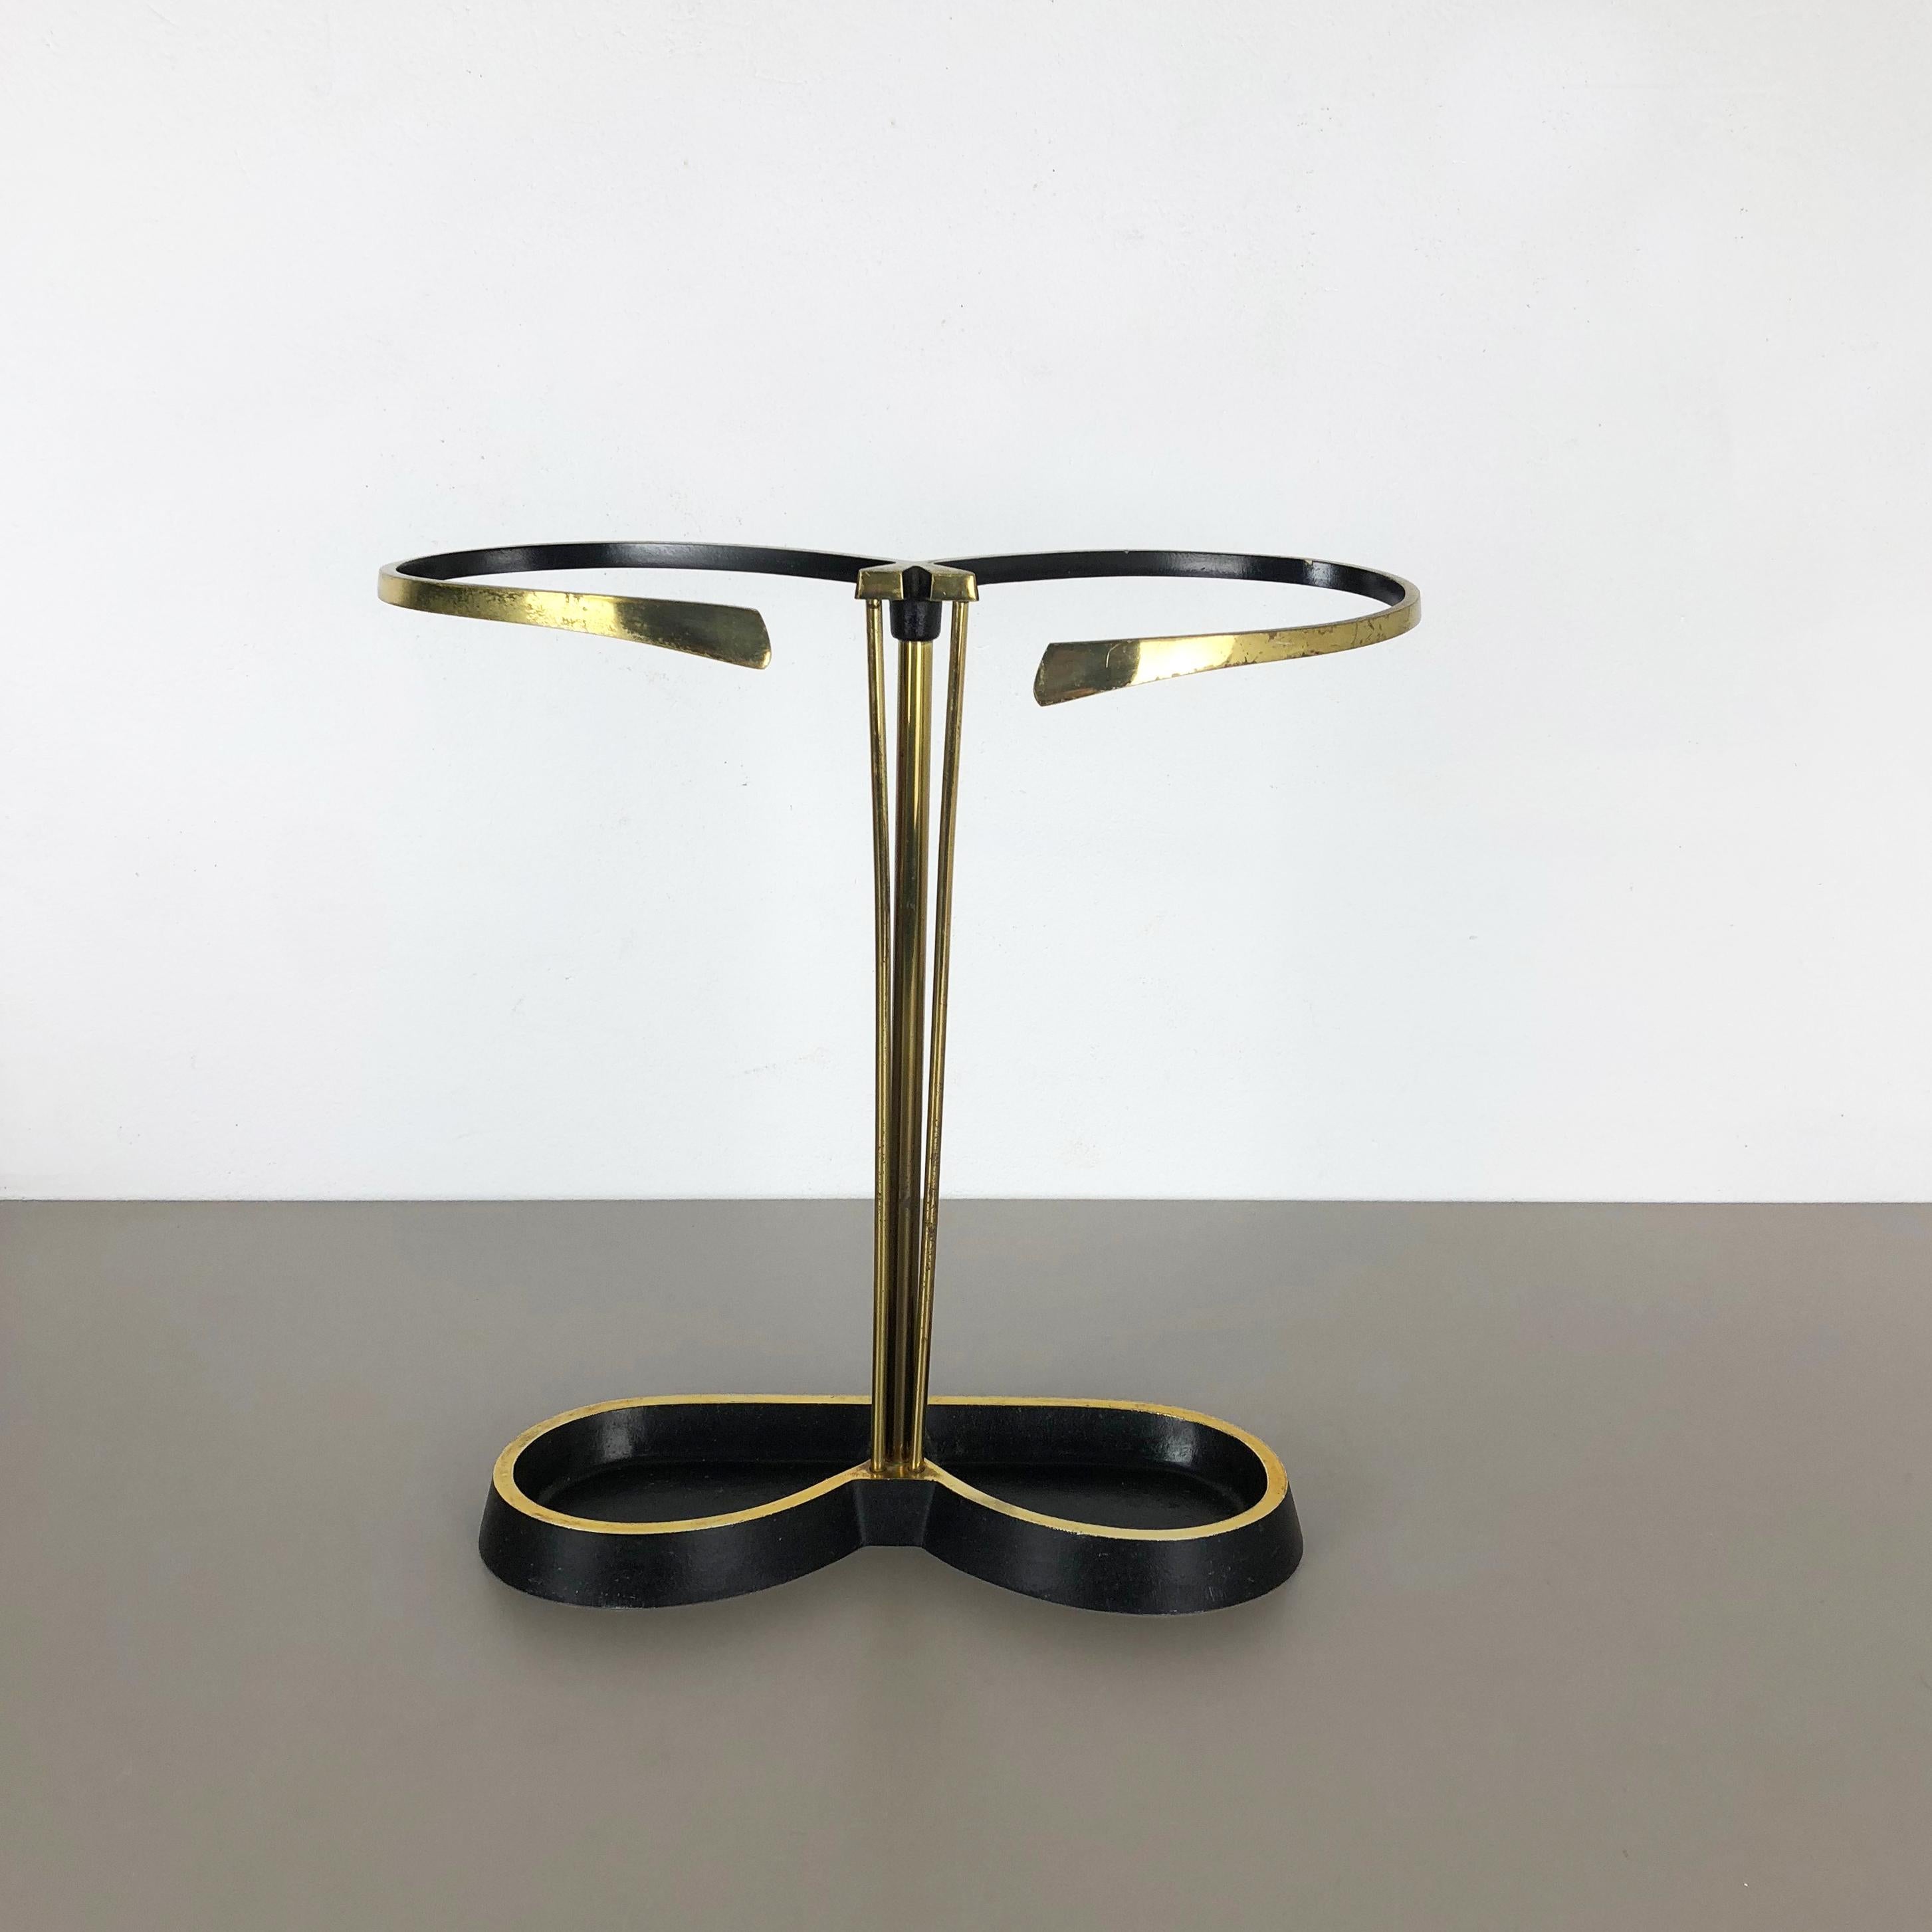 Article:

Bauhaus umbrella stand


Origin:

Austria


Age:

1950s


This original vintage Bauhaus style umbrella stand was produced in the 1950s in Austria. It is made of solid metal with brass applications at the top and upright